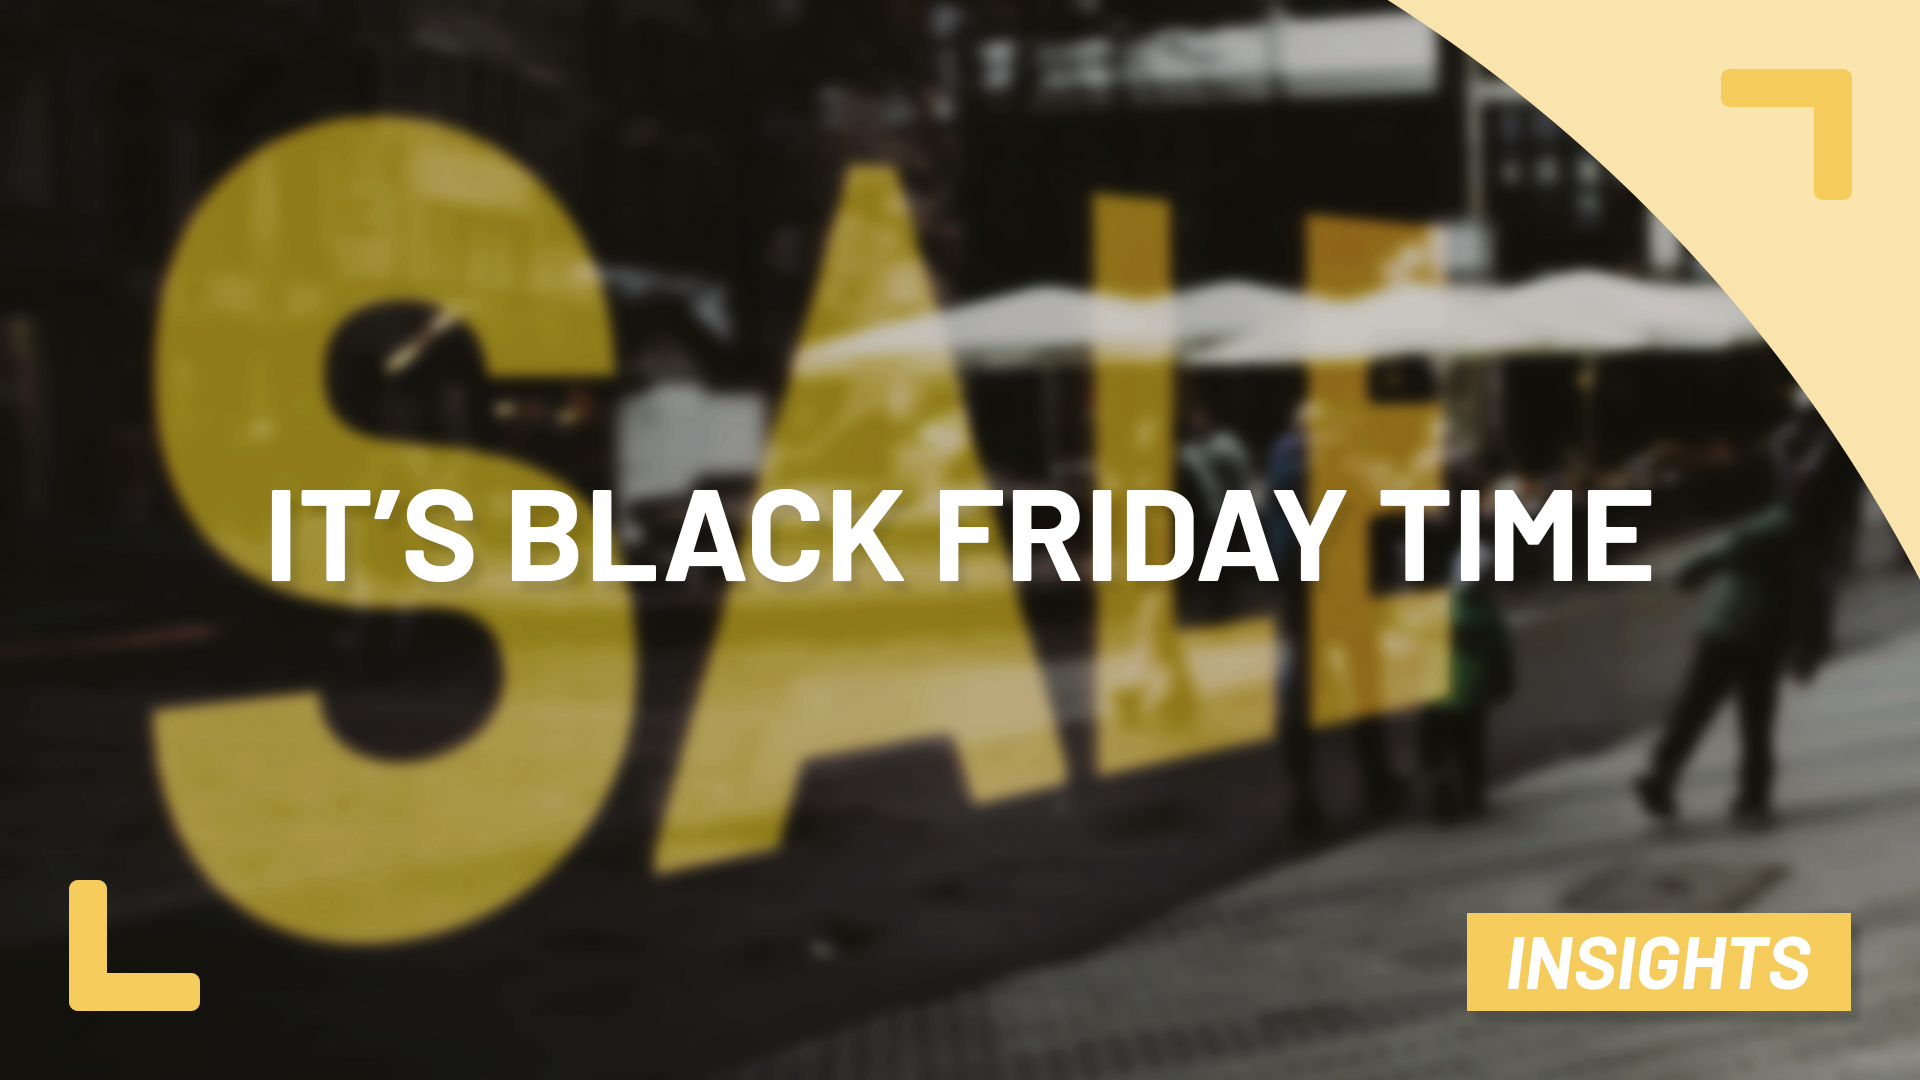 Increase your CTR on Black Friday